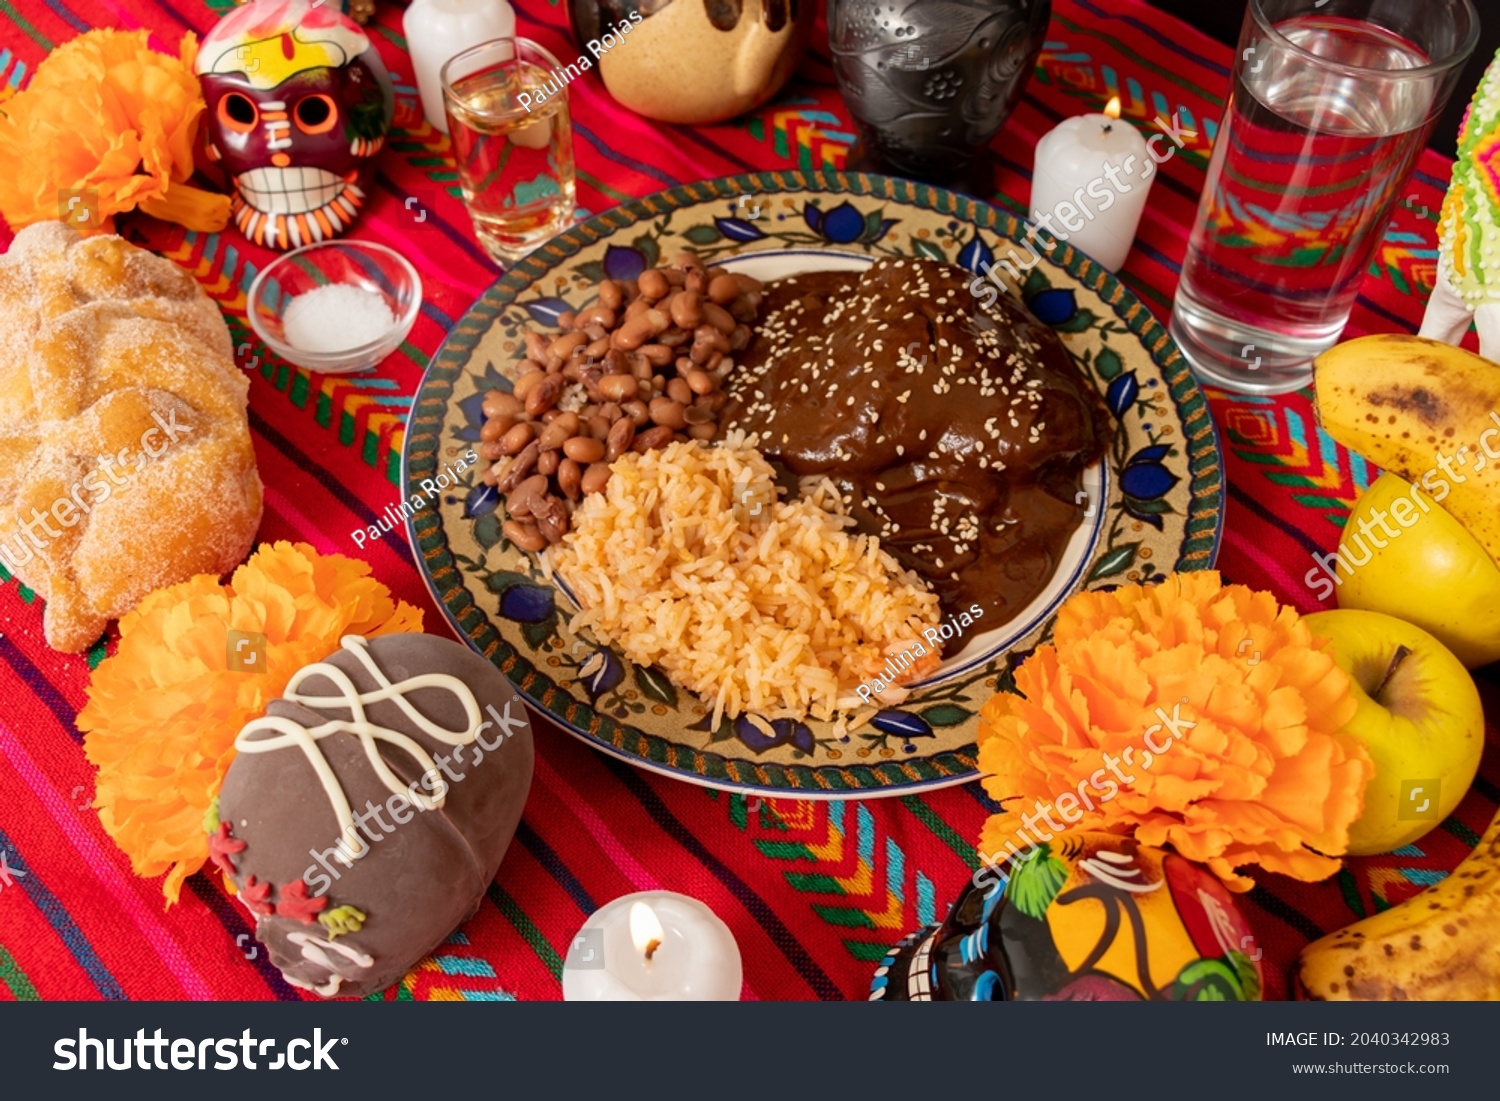 top view of an ofrenda with traditional Mexican food, alfeñique candies, fruit, candles, flowers and chocolate skulls for the Day of the Dead. #2040342983